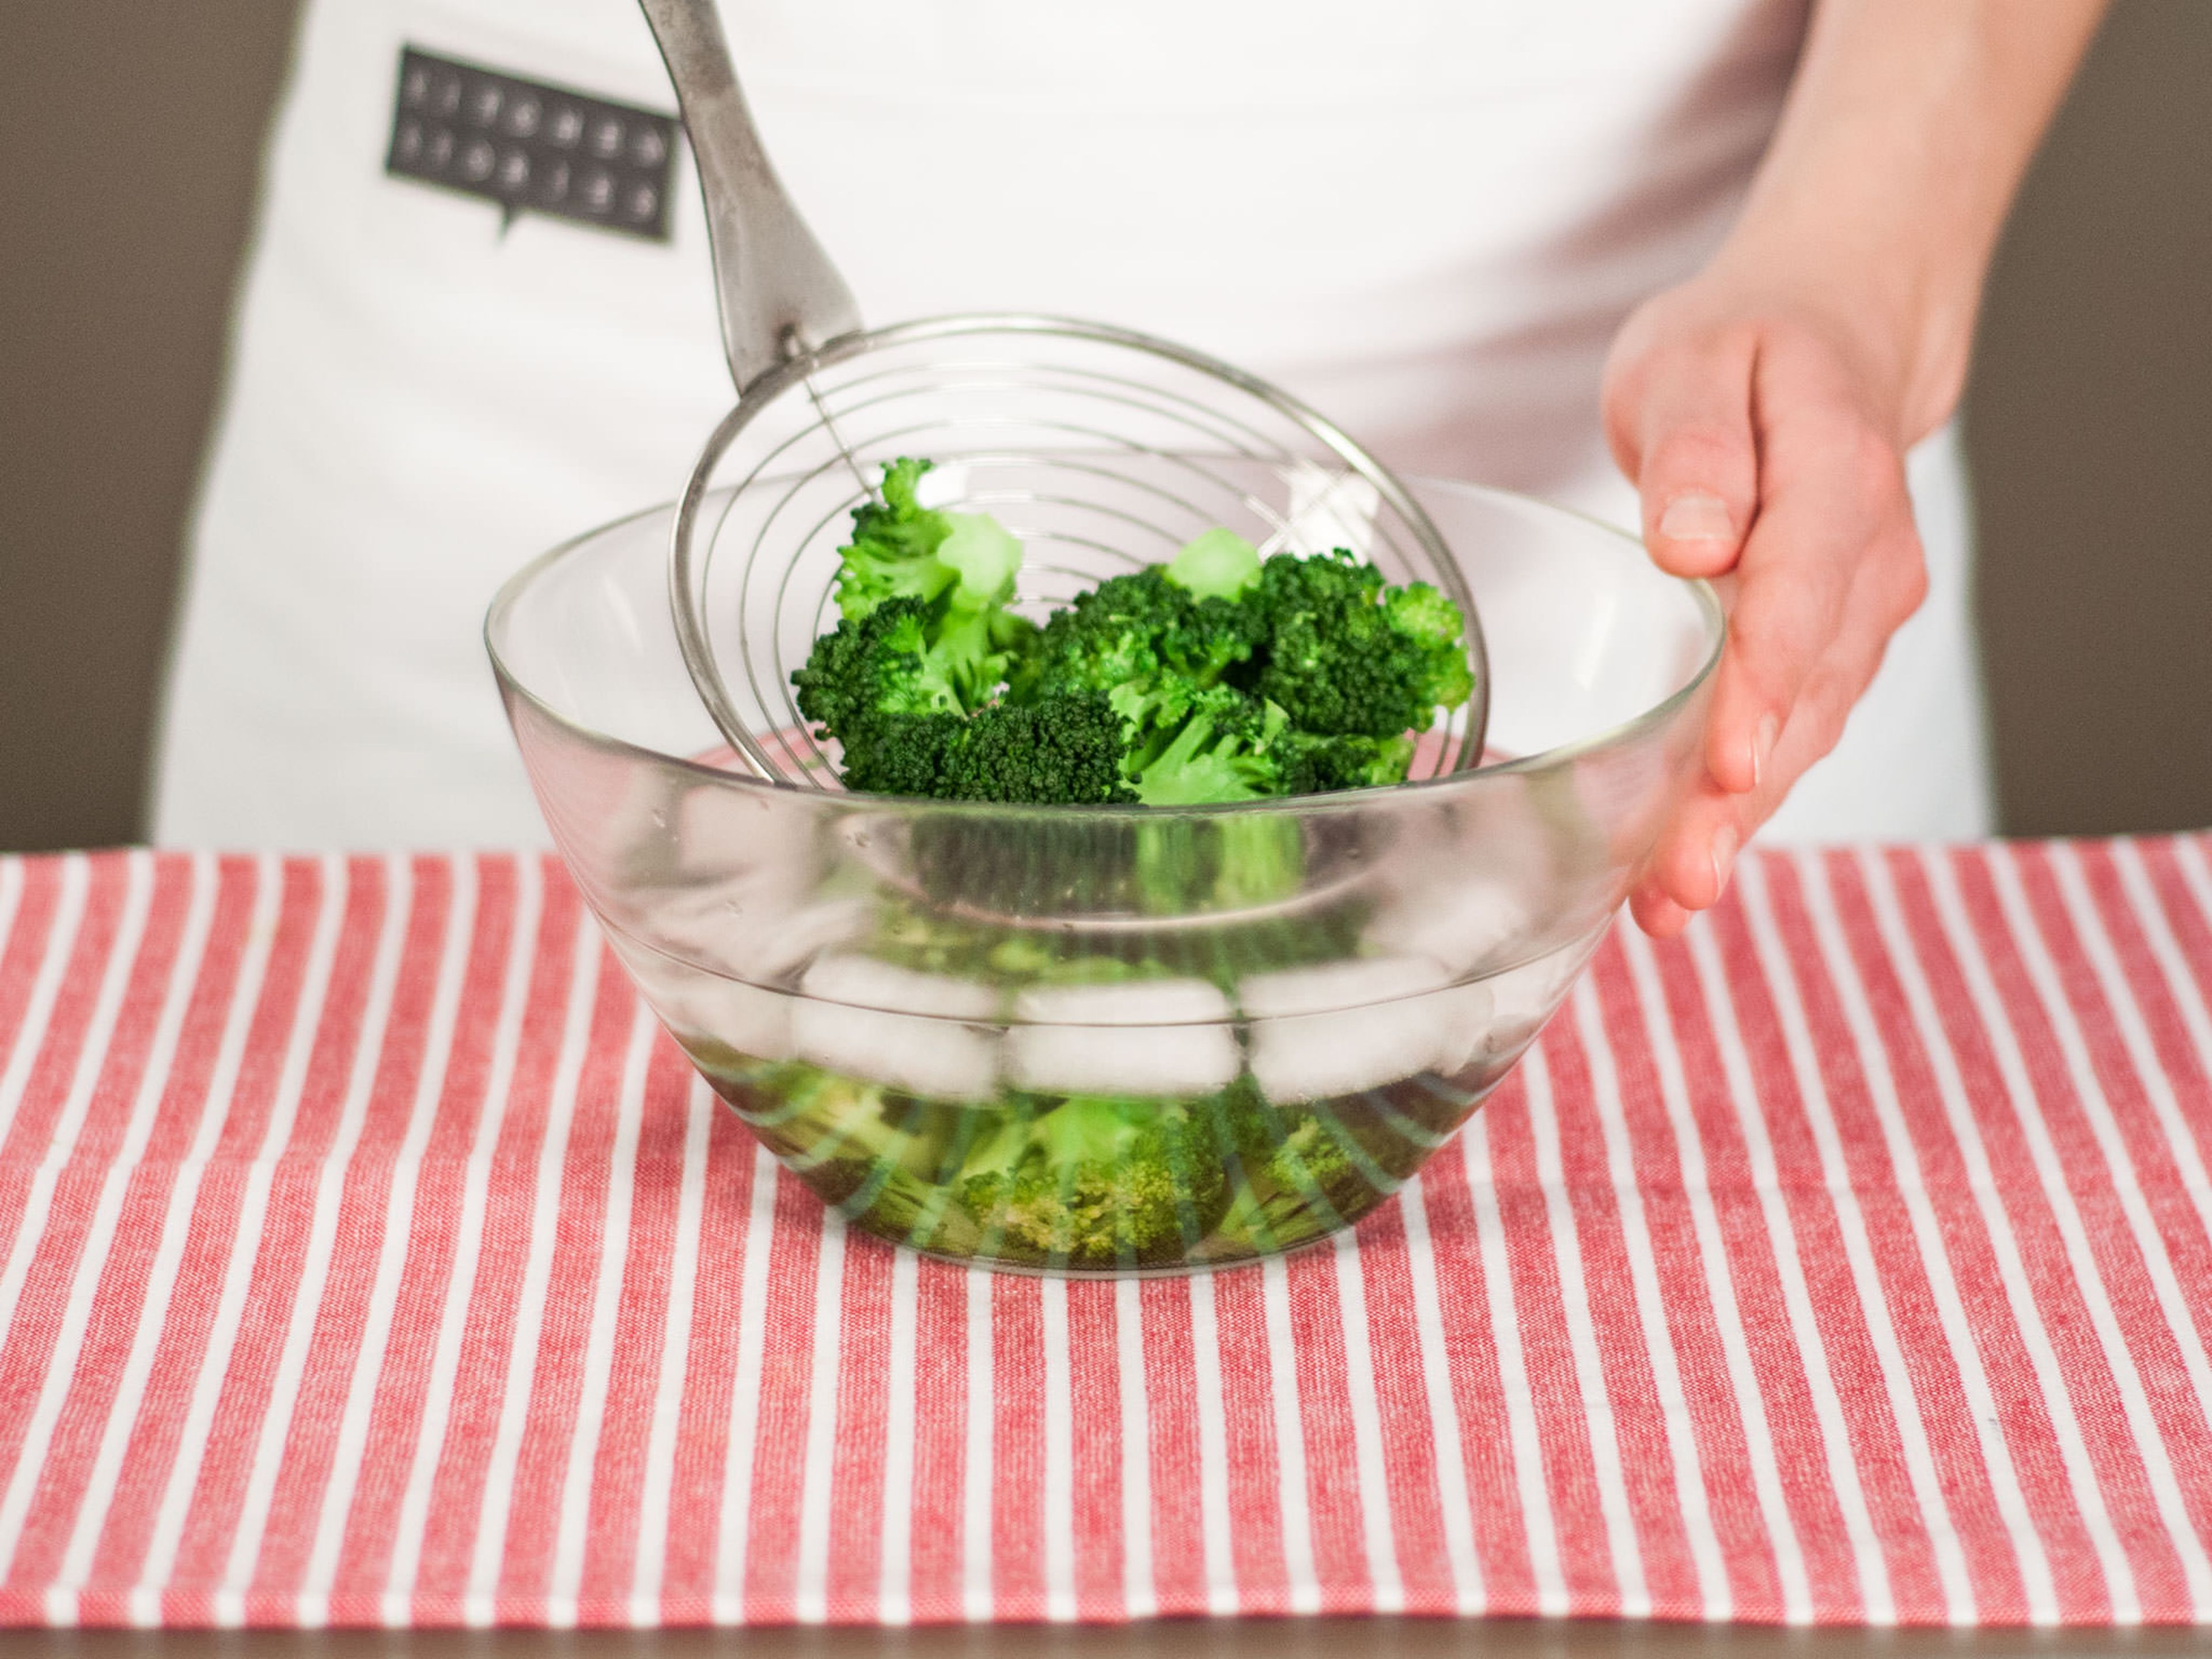 Immediately submerge broccoli into a bowl filled with cold water and ice cubes. Allow to cool for approx. 1- 2 min. Drain and set aside.